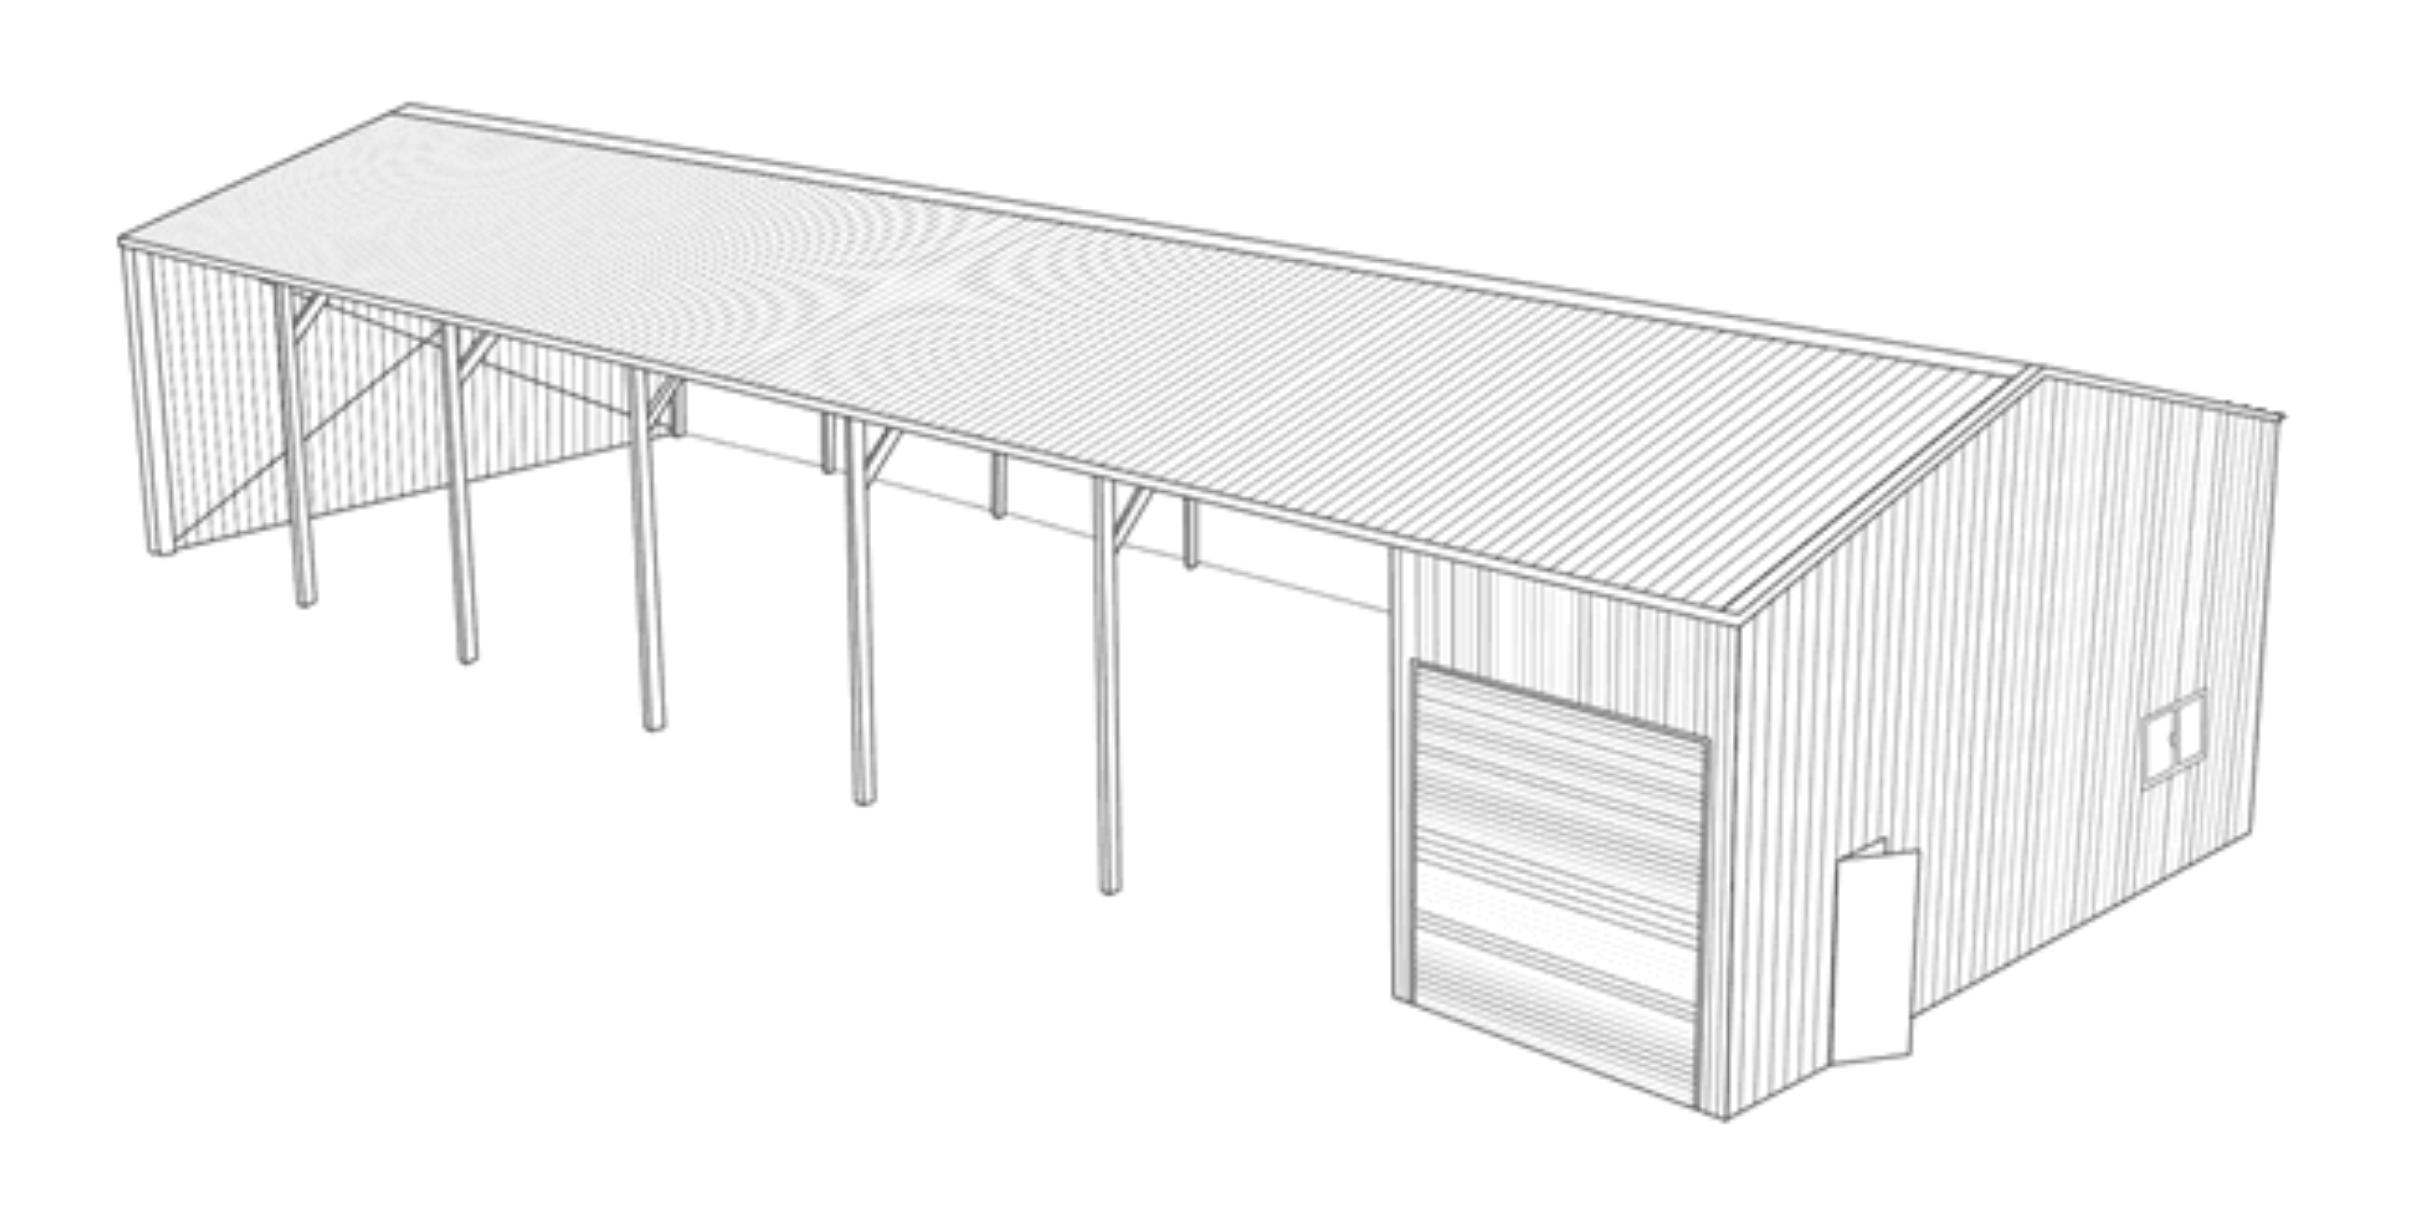 Westspan Agricultural Shed 3d drawing